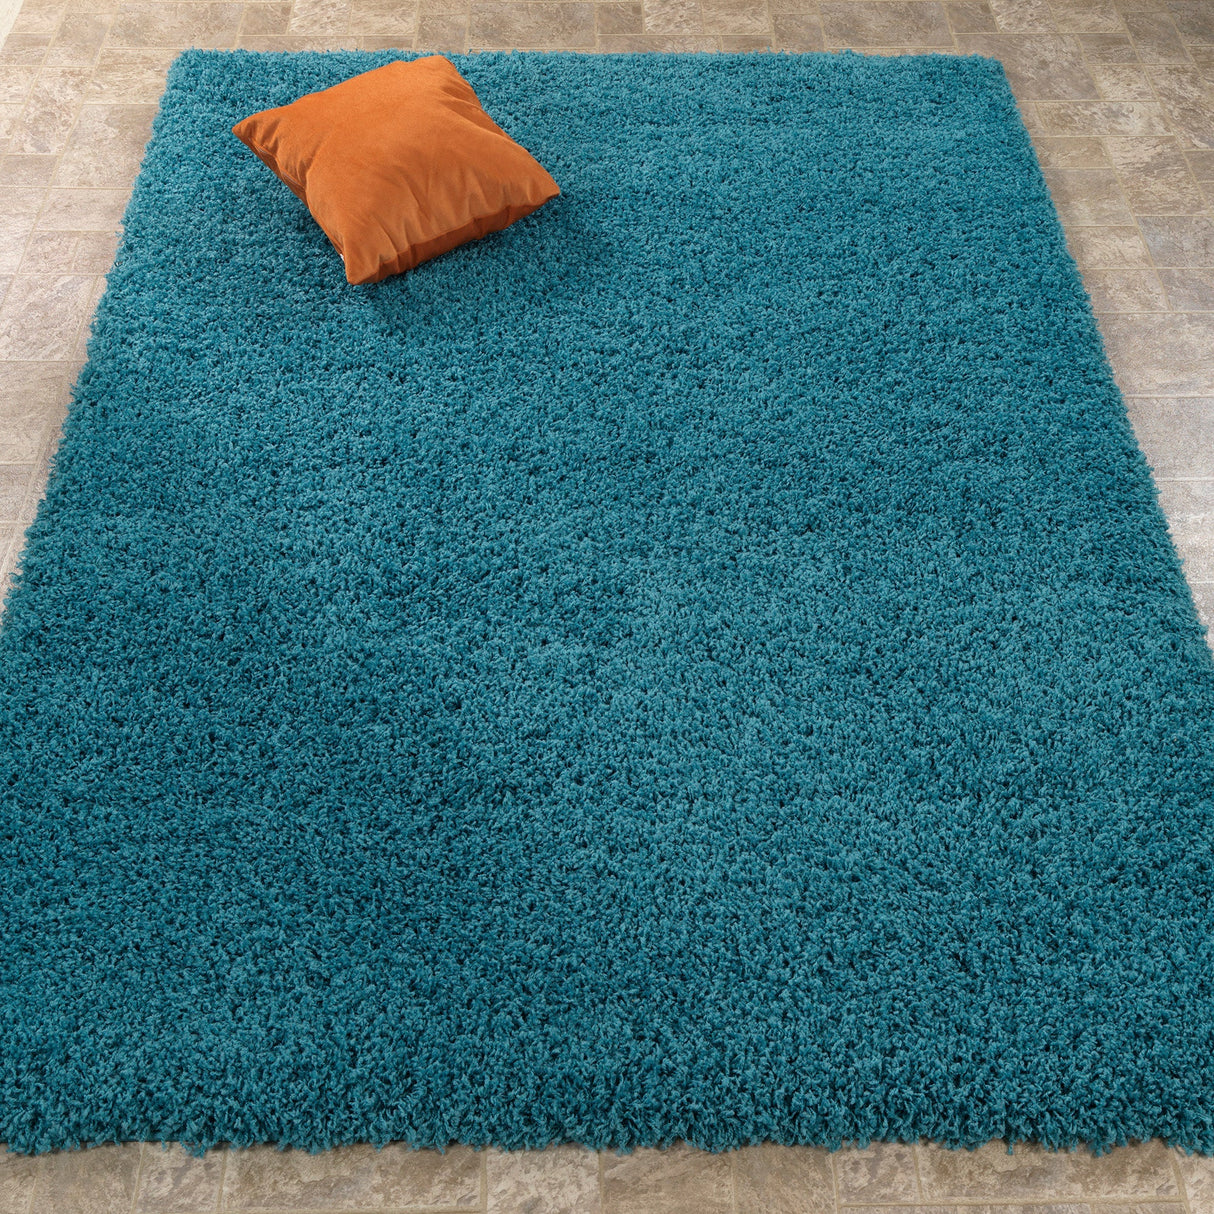 Cozy Solid Turquoise Shaggy Area Rug - 8X10